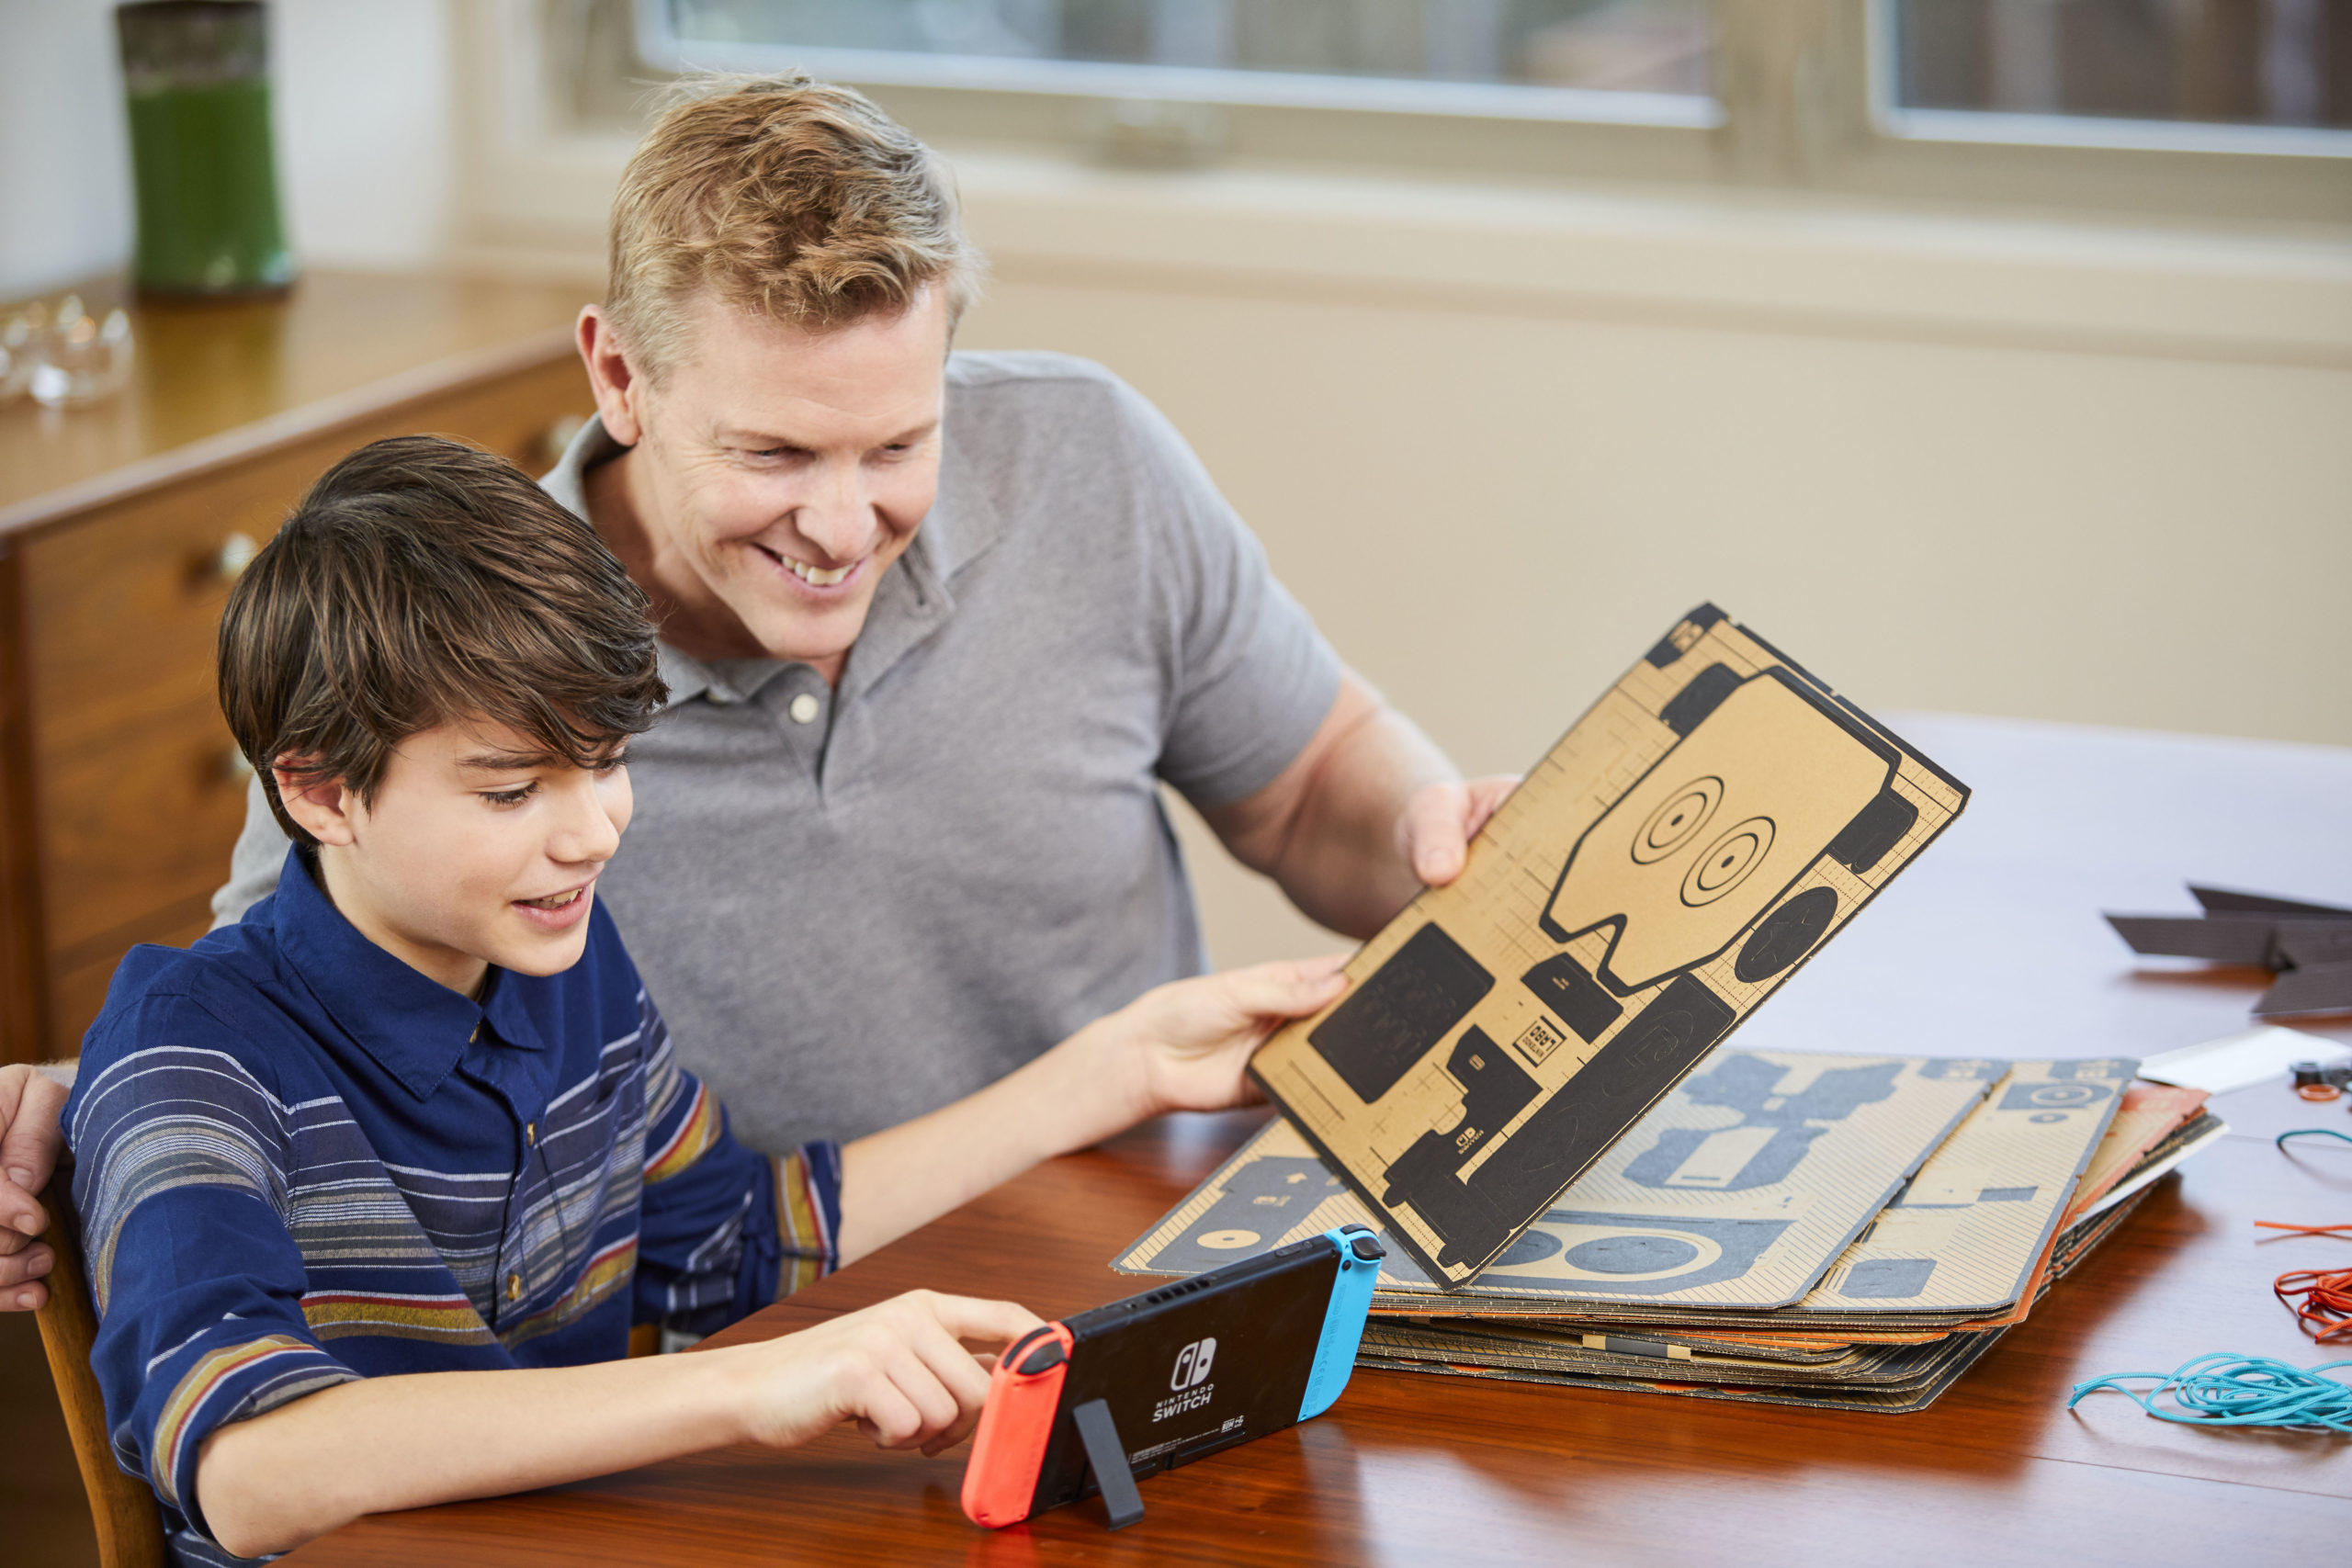 That Nintendo Labo Robot Game Looks Awfully Familiar